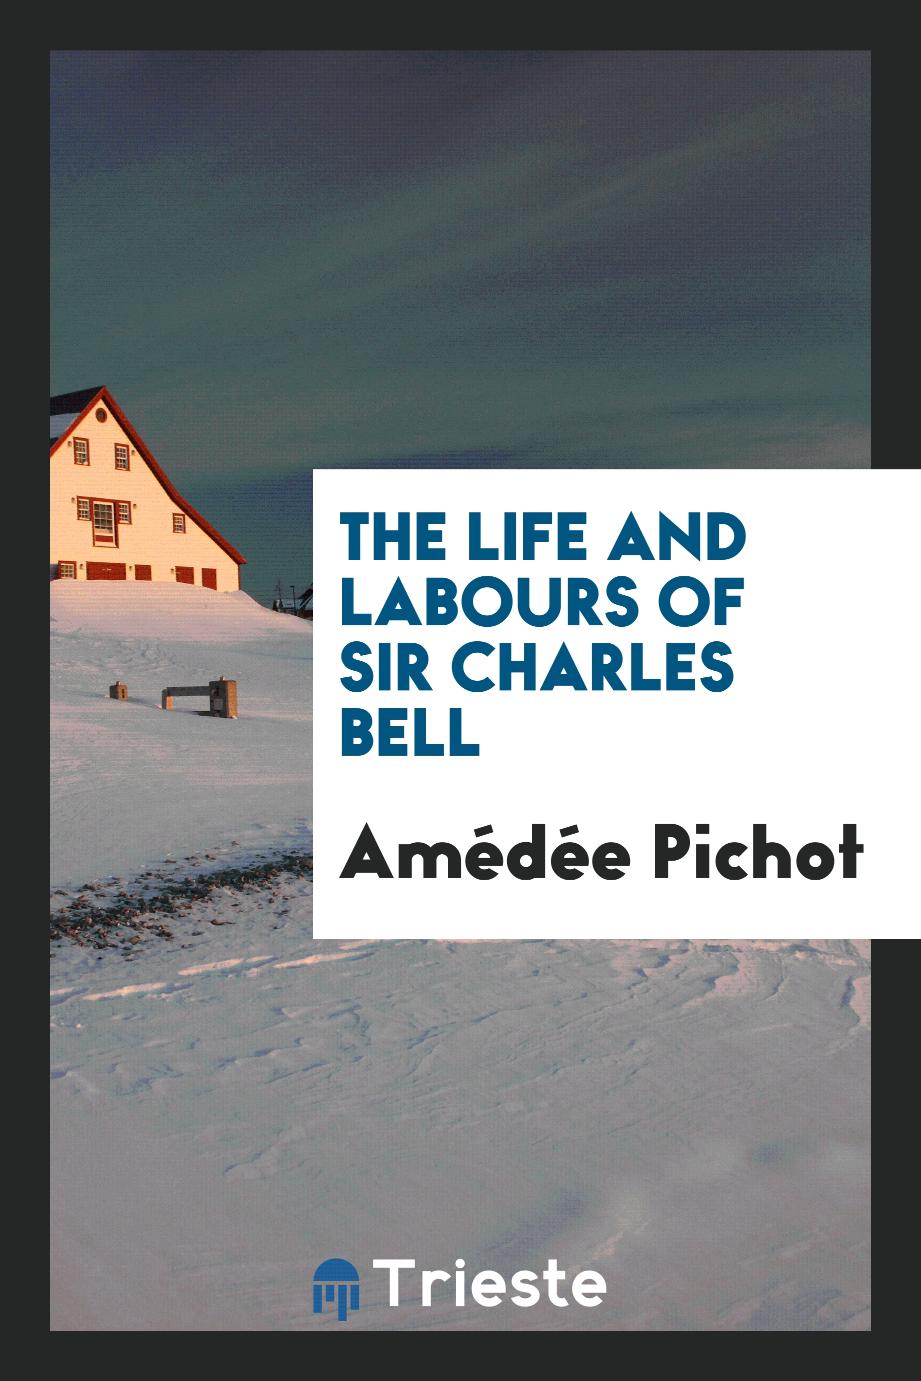 The life and labours of Sir Charles Bell